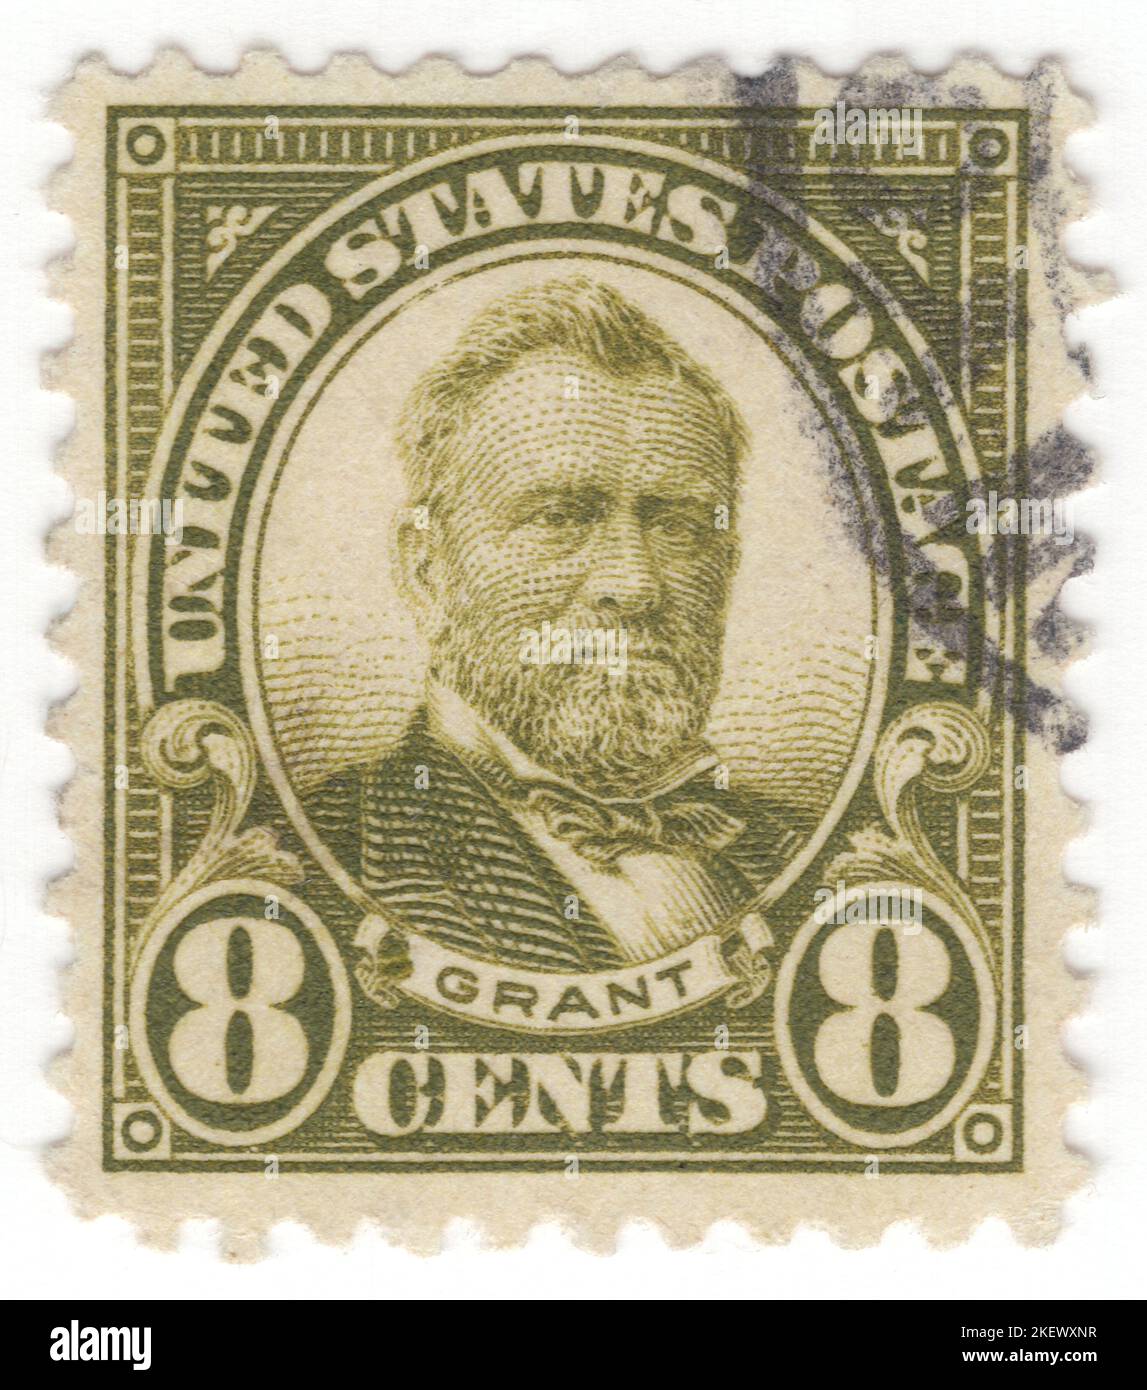 USA - 1923: An 8 cents olive-green postage stamp depicting portrait of Ulysses S. Grant (born Hiram Ulysses Grant), American military officer and politician who served as the 18th president of the United States from 1869 to 1877. As Commanding General, he led the Union Army to victory in the American Civil War in 1865 and thereafter briefly served as Secretary of War. Later, as president, Grant was an effective civil rights executive who signed the bill that created the Justice Department and worked with Radical Republicans to protect African Americans during Reconstruction Stock Photo